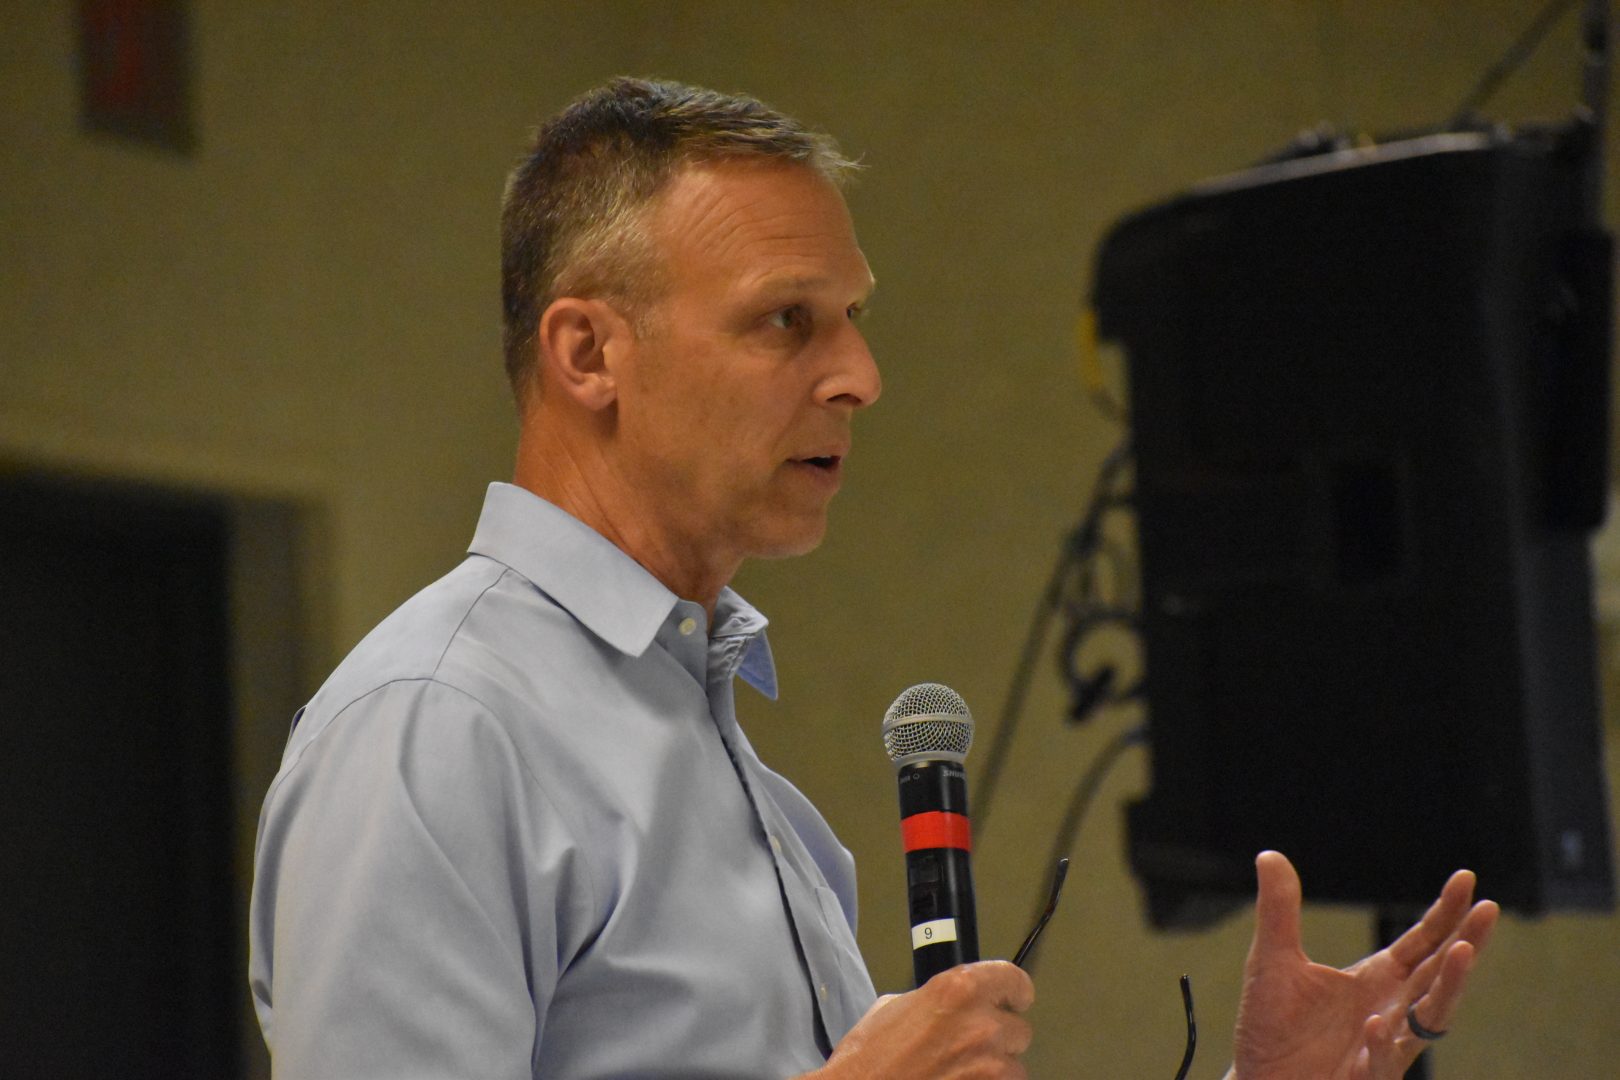 U.S. Rep. Scott Perry, R-Pa., speaks to the crowd during an in-person town hall on July 30, 2019.